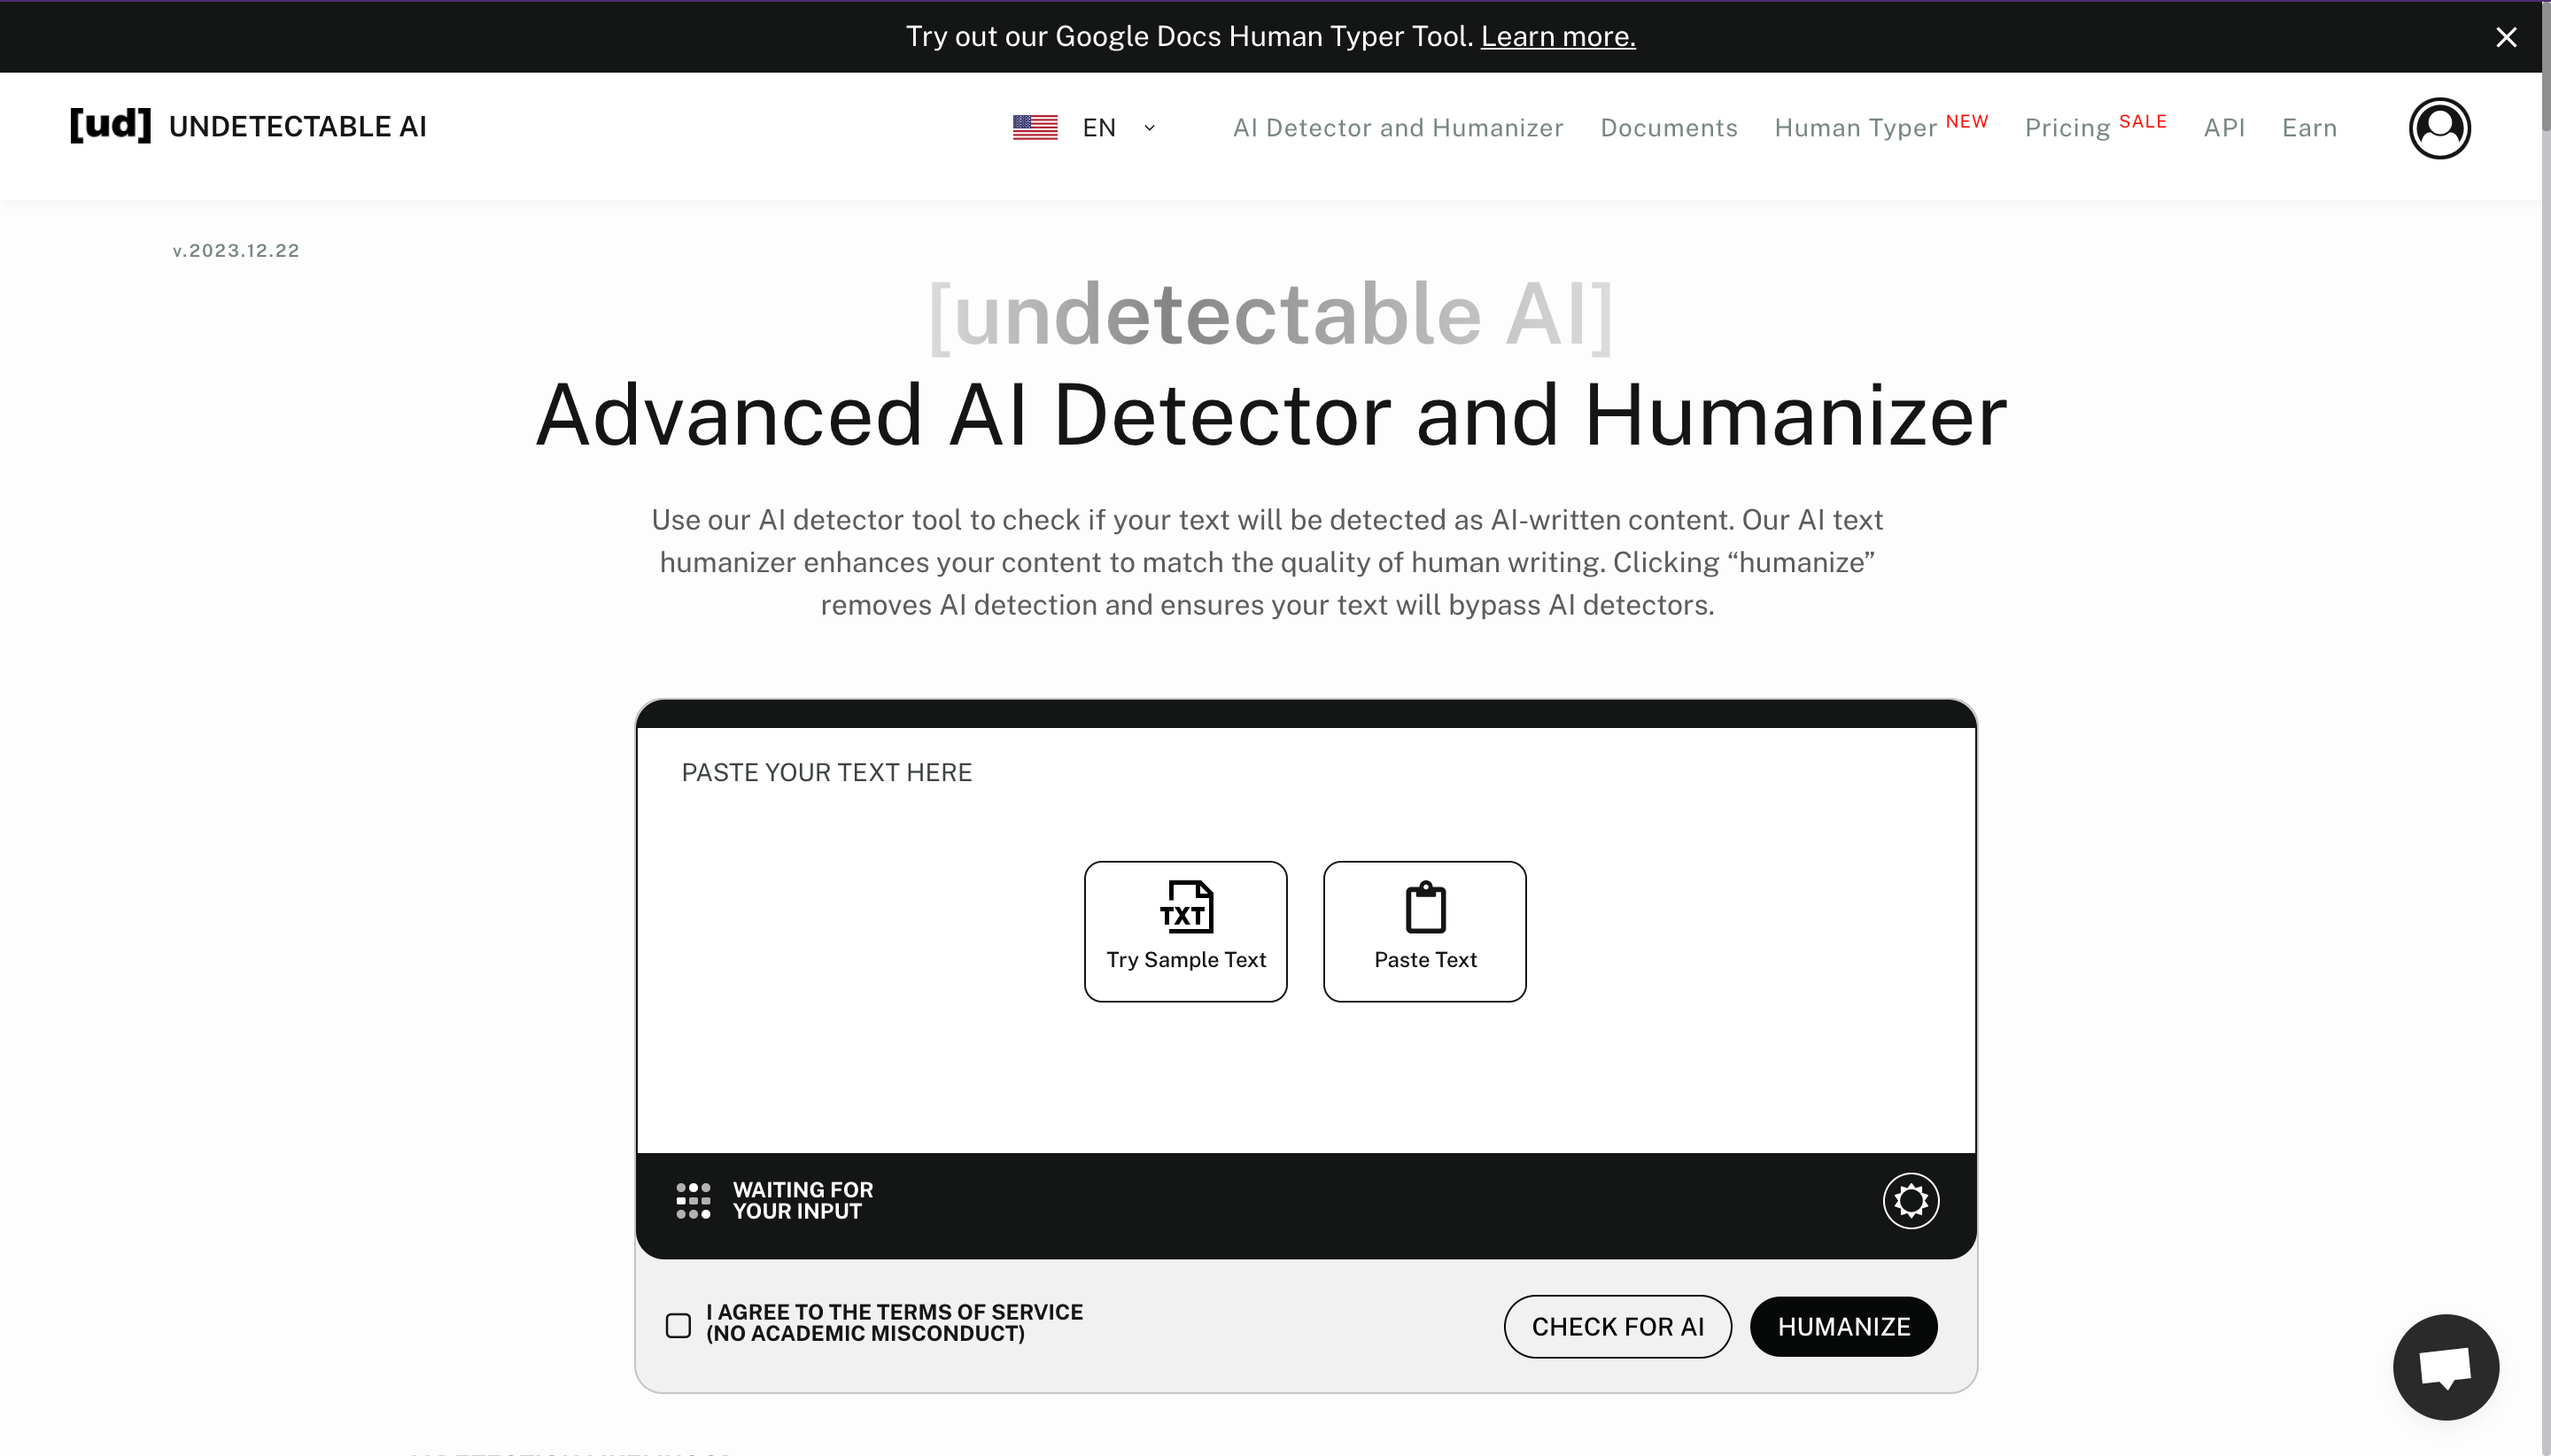 Does Undetectable AI Work?